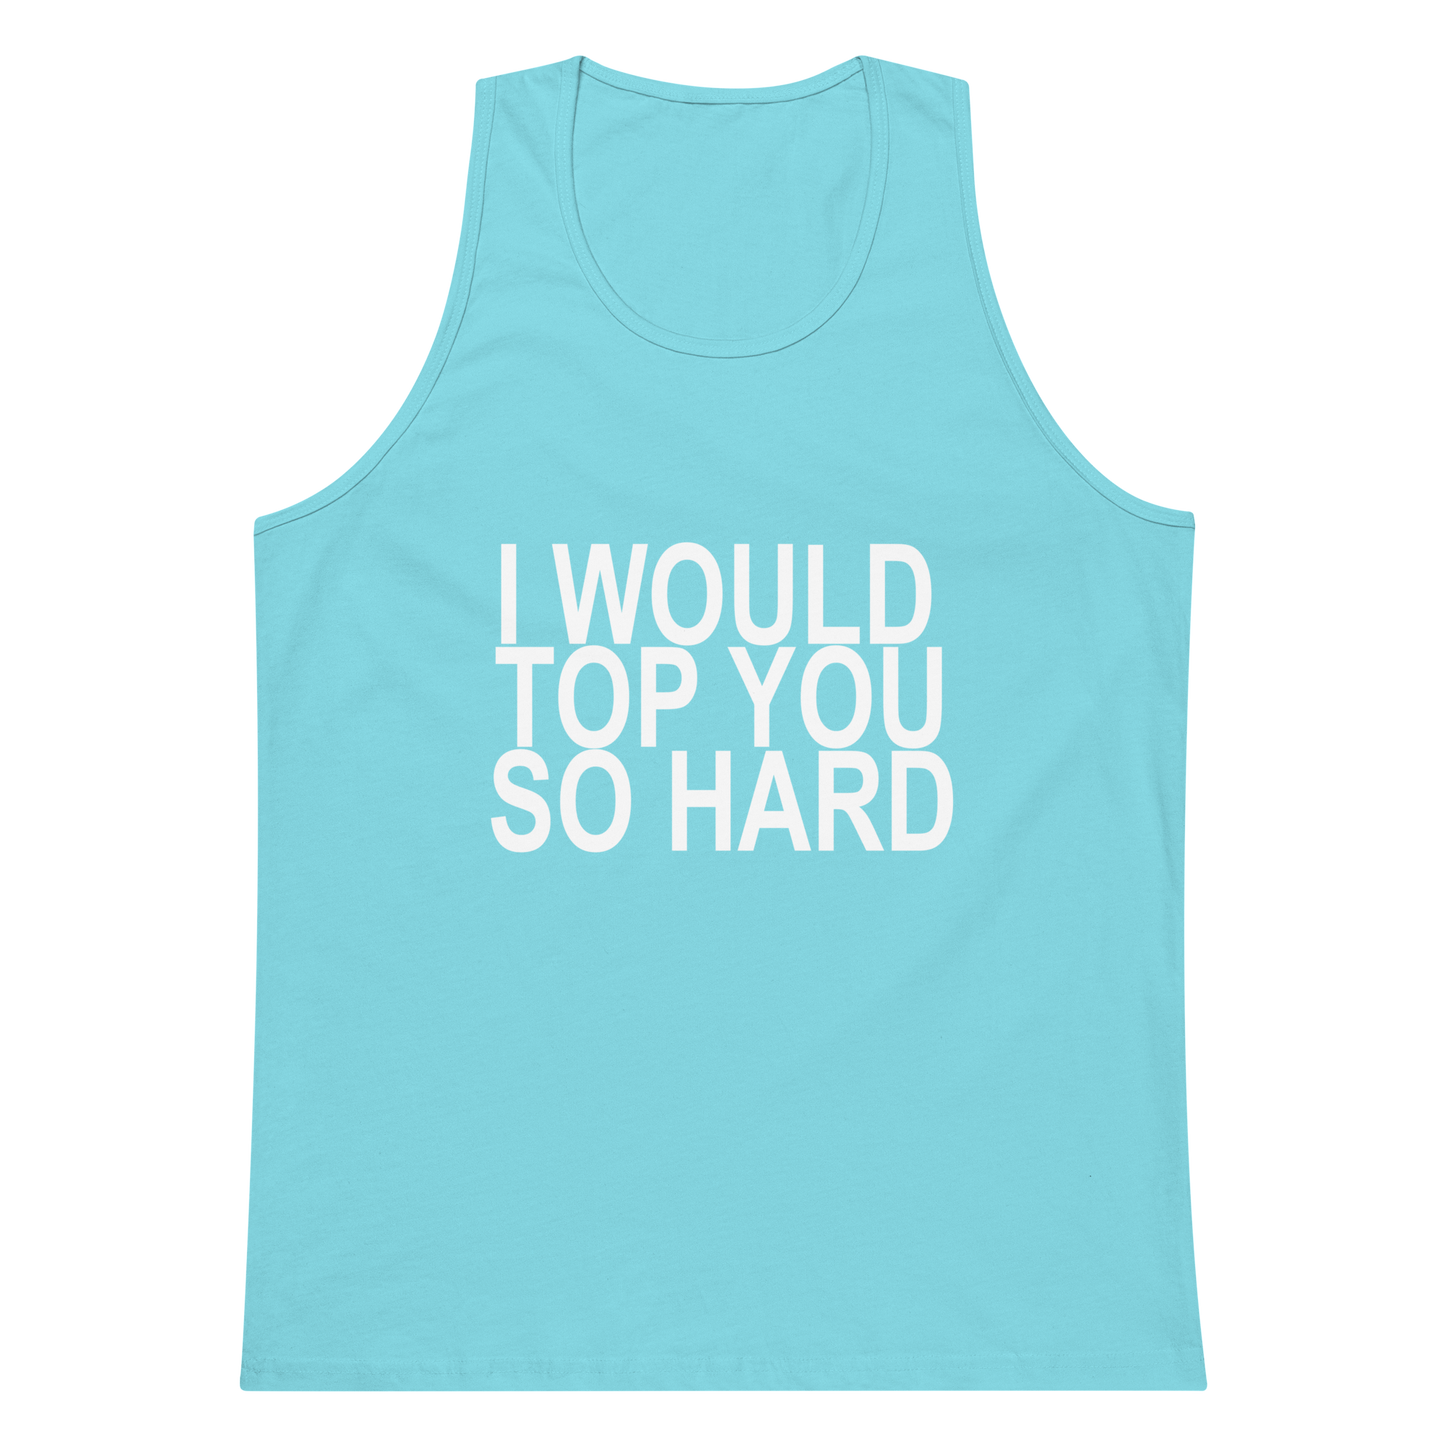 I Would Top You So Hard Tank Top